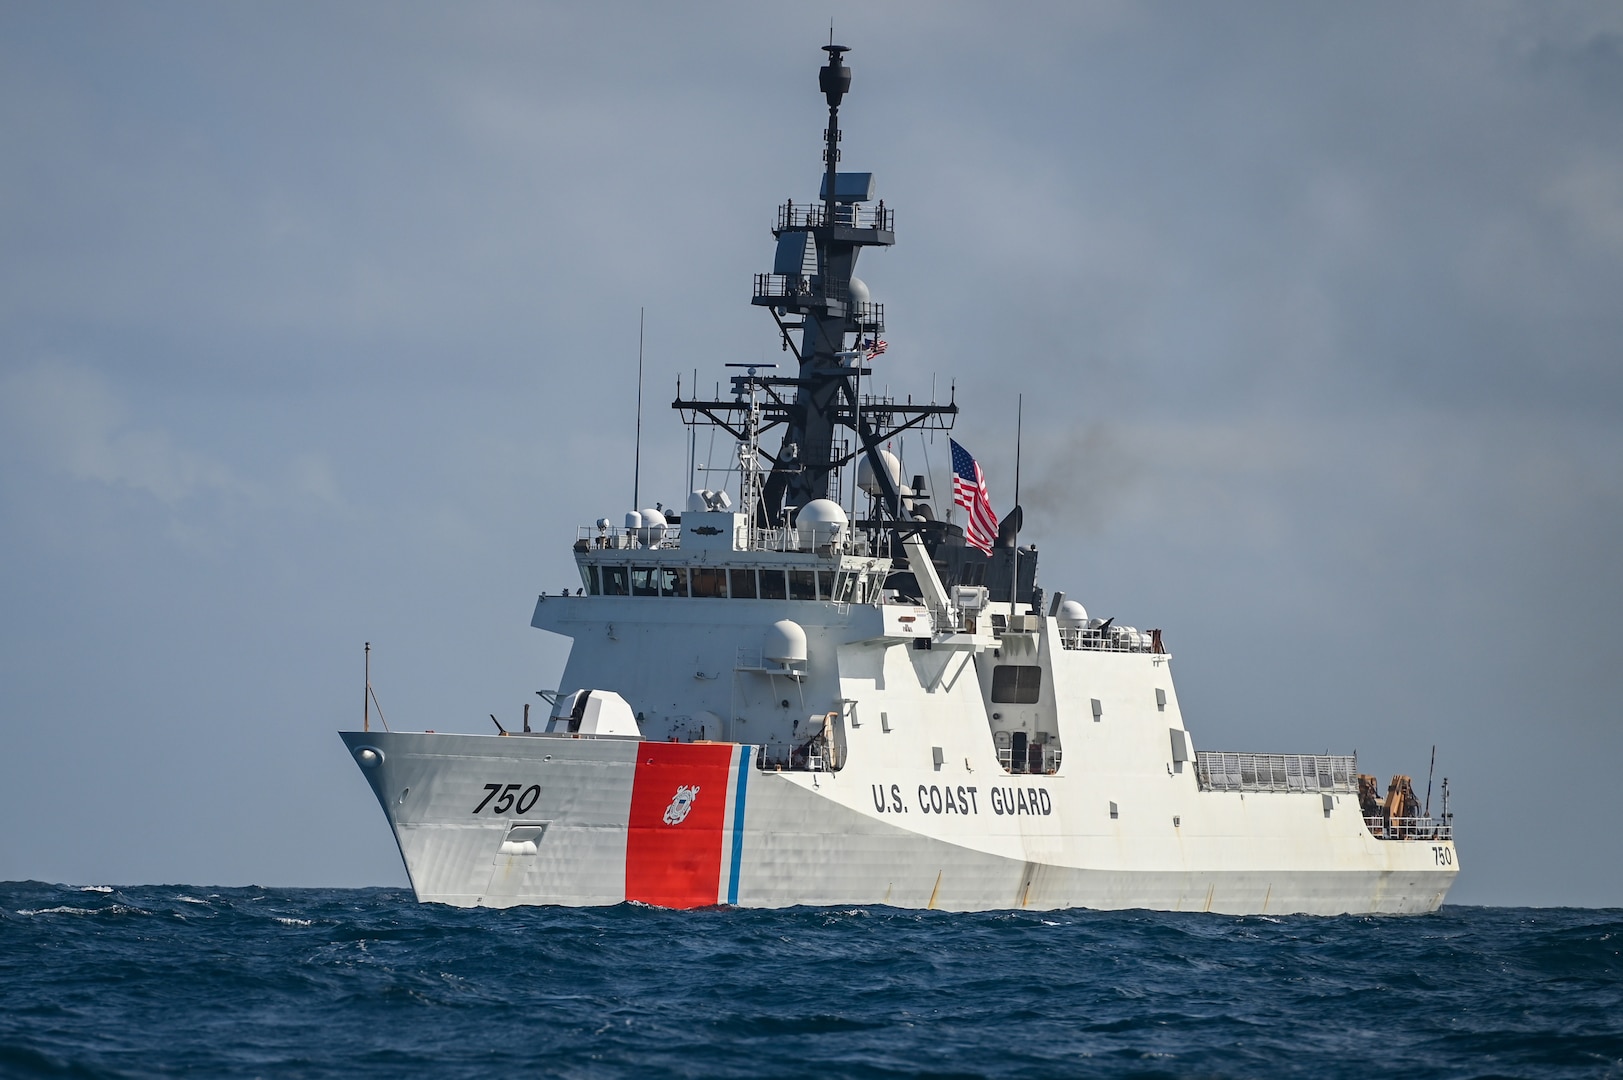 U.S. Coast Guard Cutter Bertholf (WMSL 750) transits near the Singapore Straits, Feb. 29, 2024. The Bertholf is a 418-foot National Security Cutter currently deployed to the Indo-Pacific region under the tactical control of U.S. 7th Fleet. (U.S. Coast Guard photo by Petty Officer Steve Strohmaier)